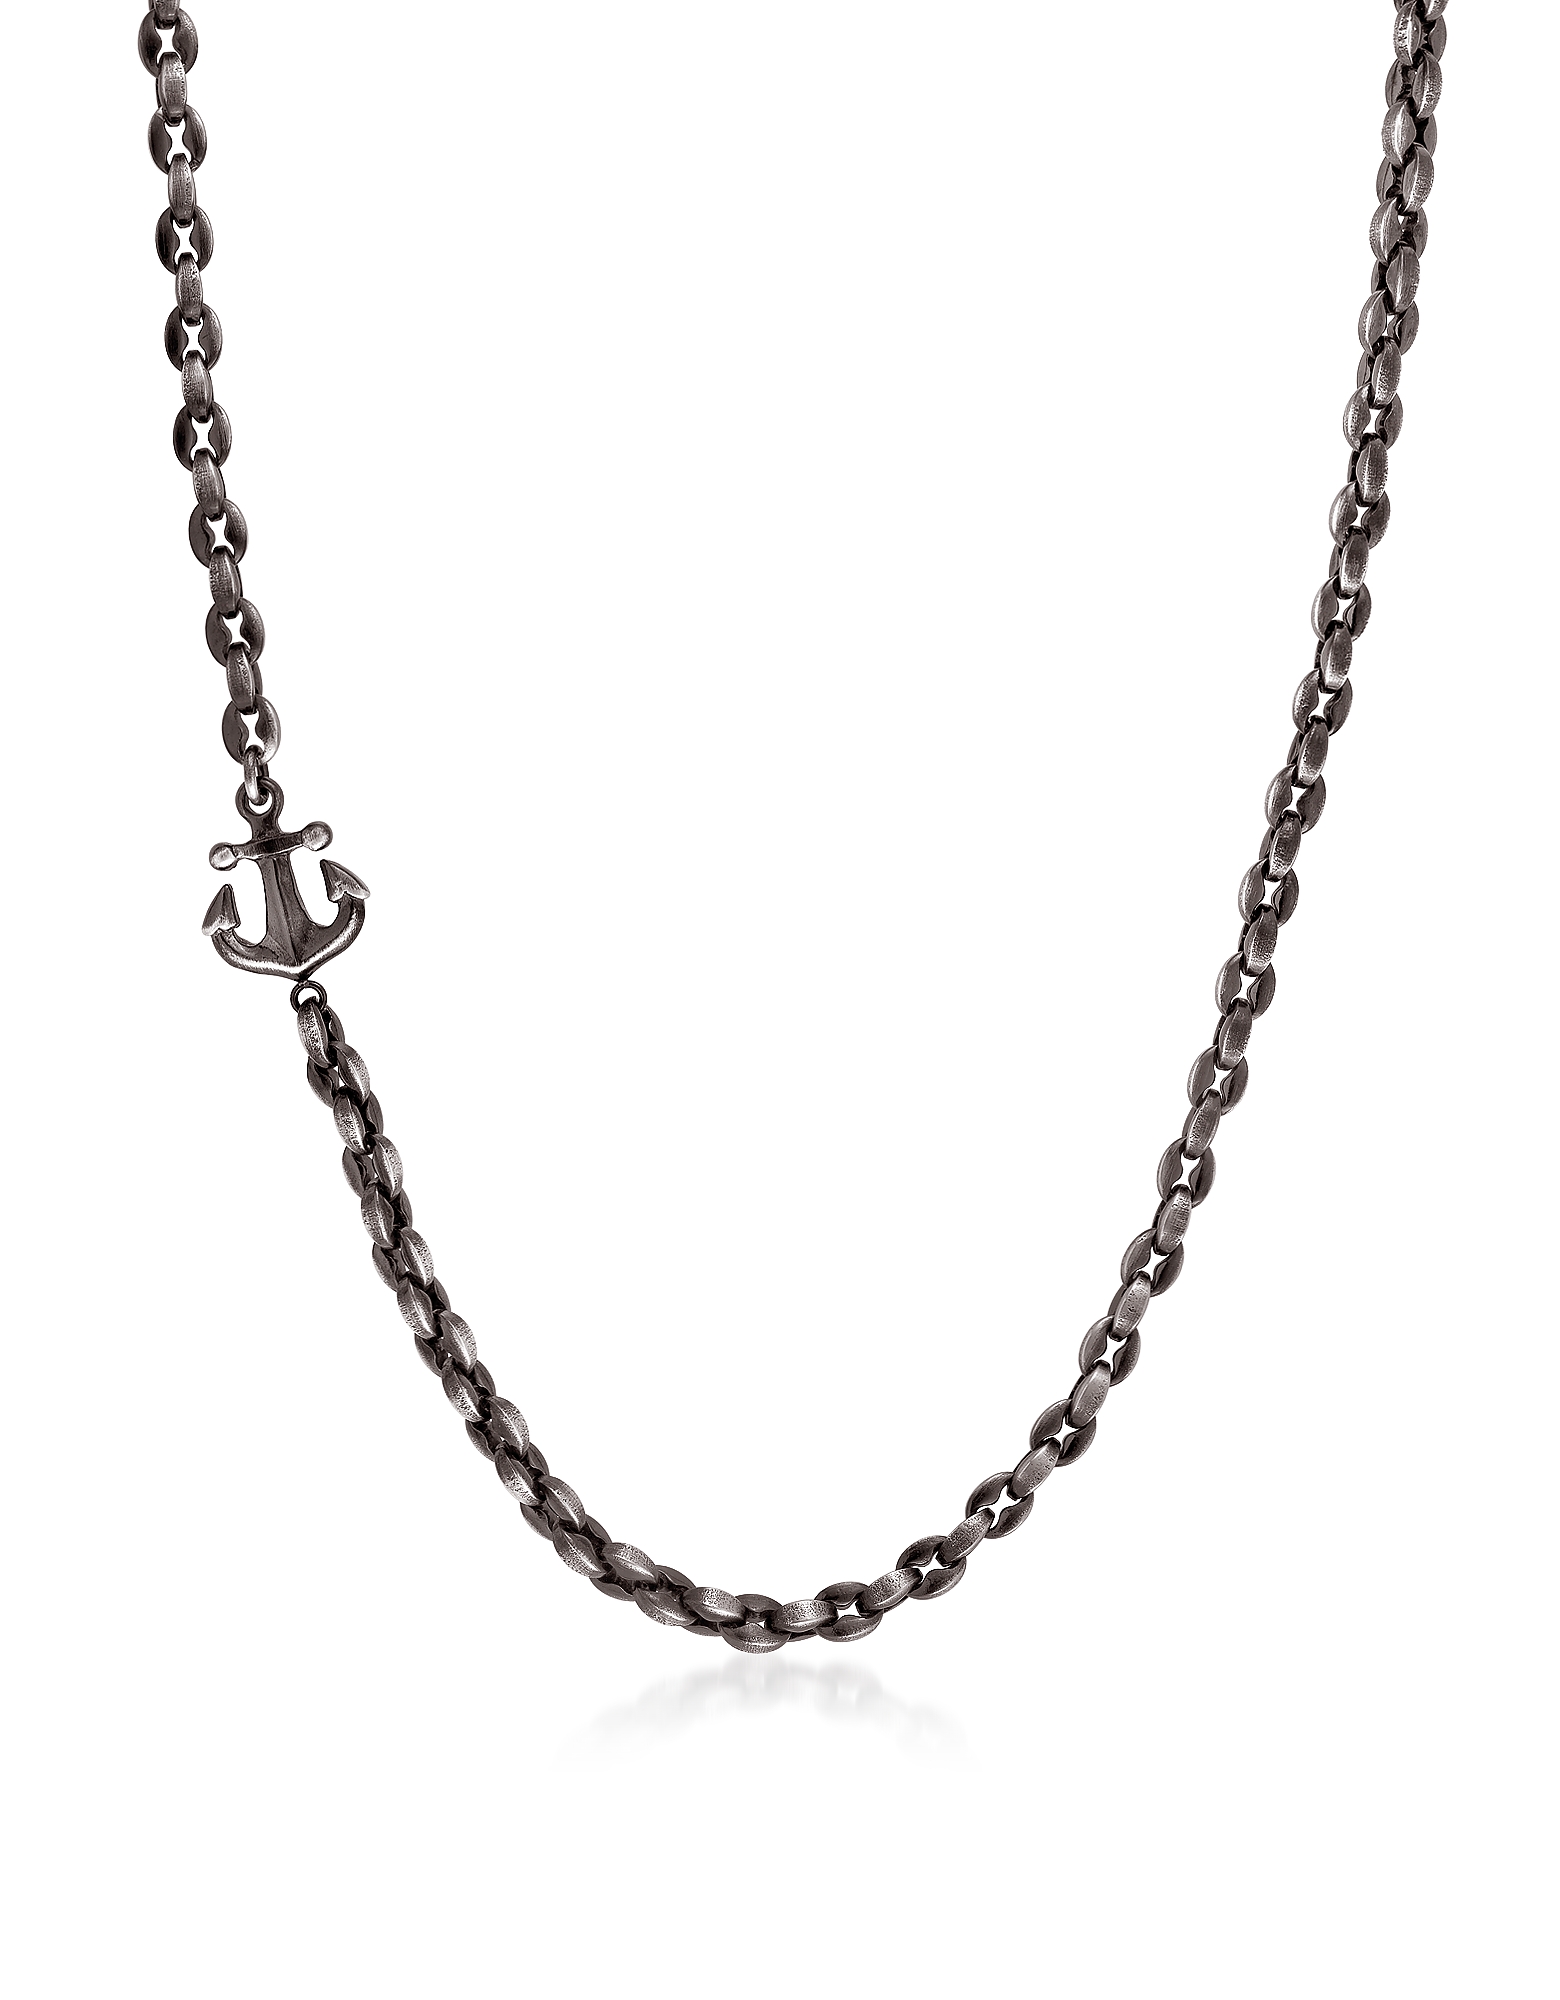 

Black PVD Stainless Steel Men's Anchor Necklace